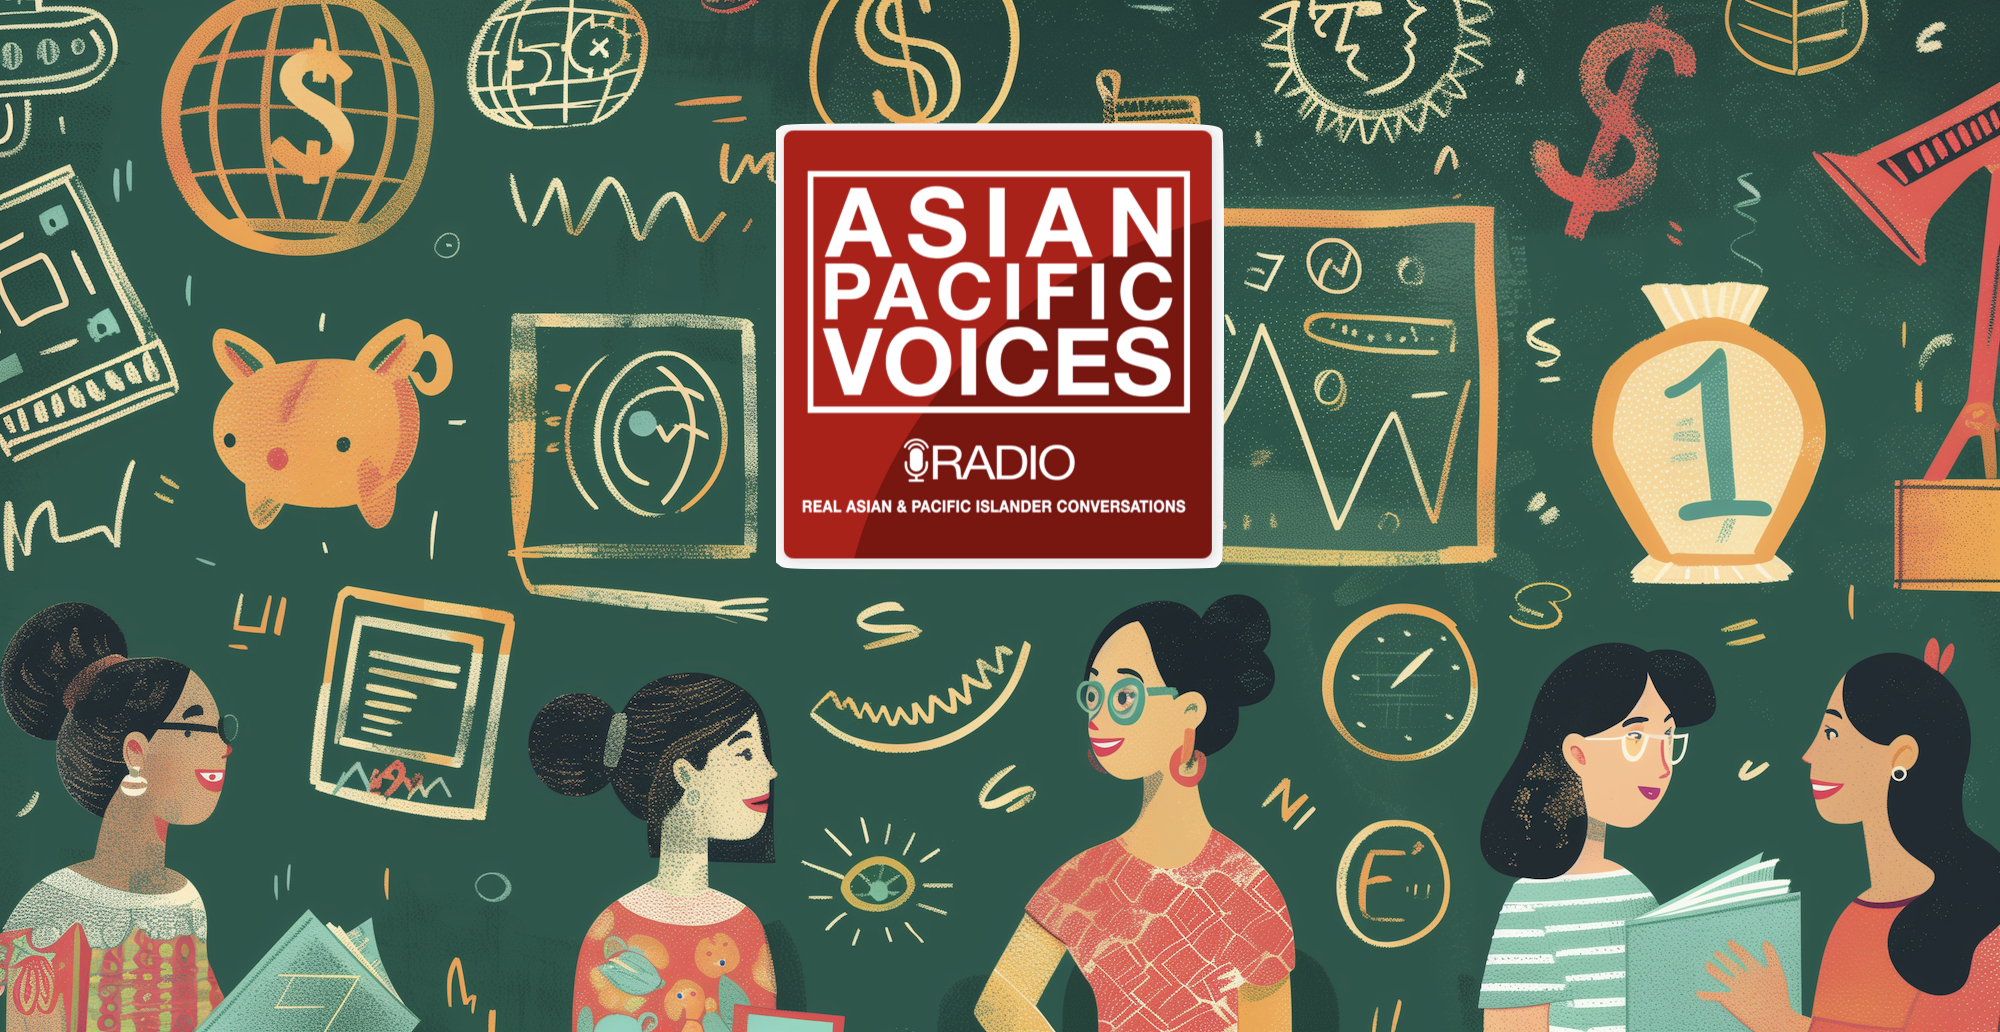 Kim Scouller on Asian Pacific Voices Radio